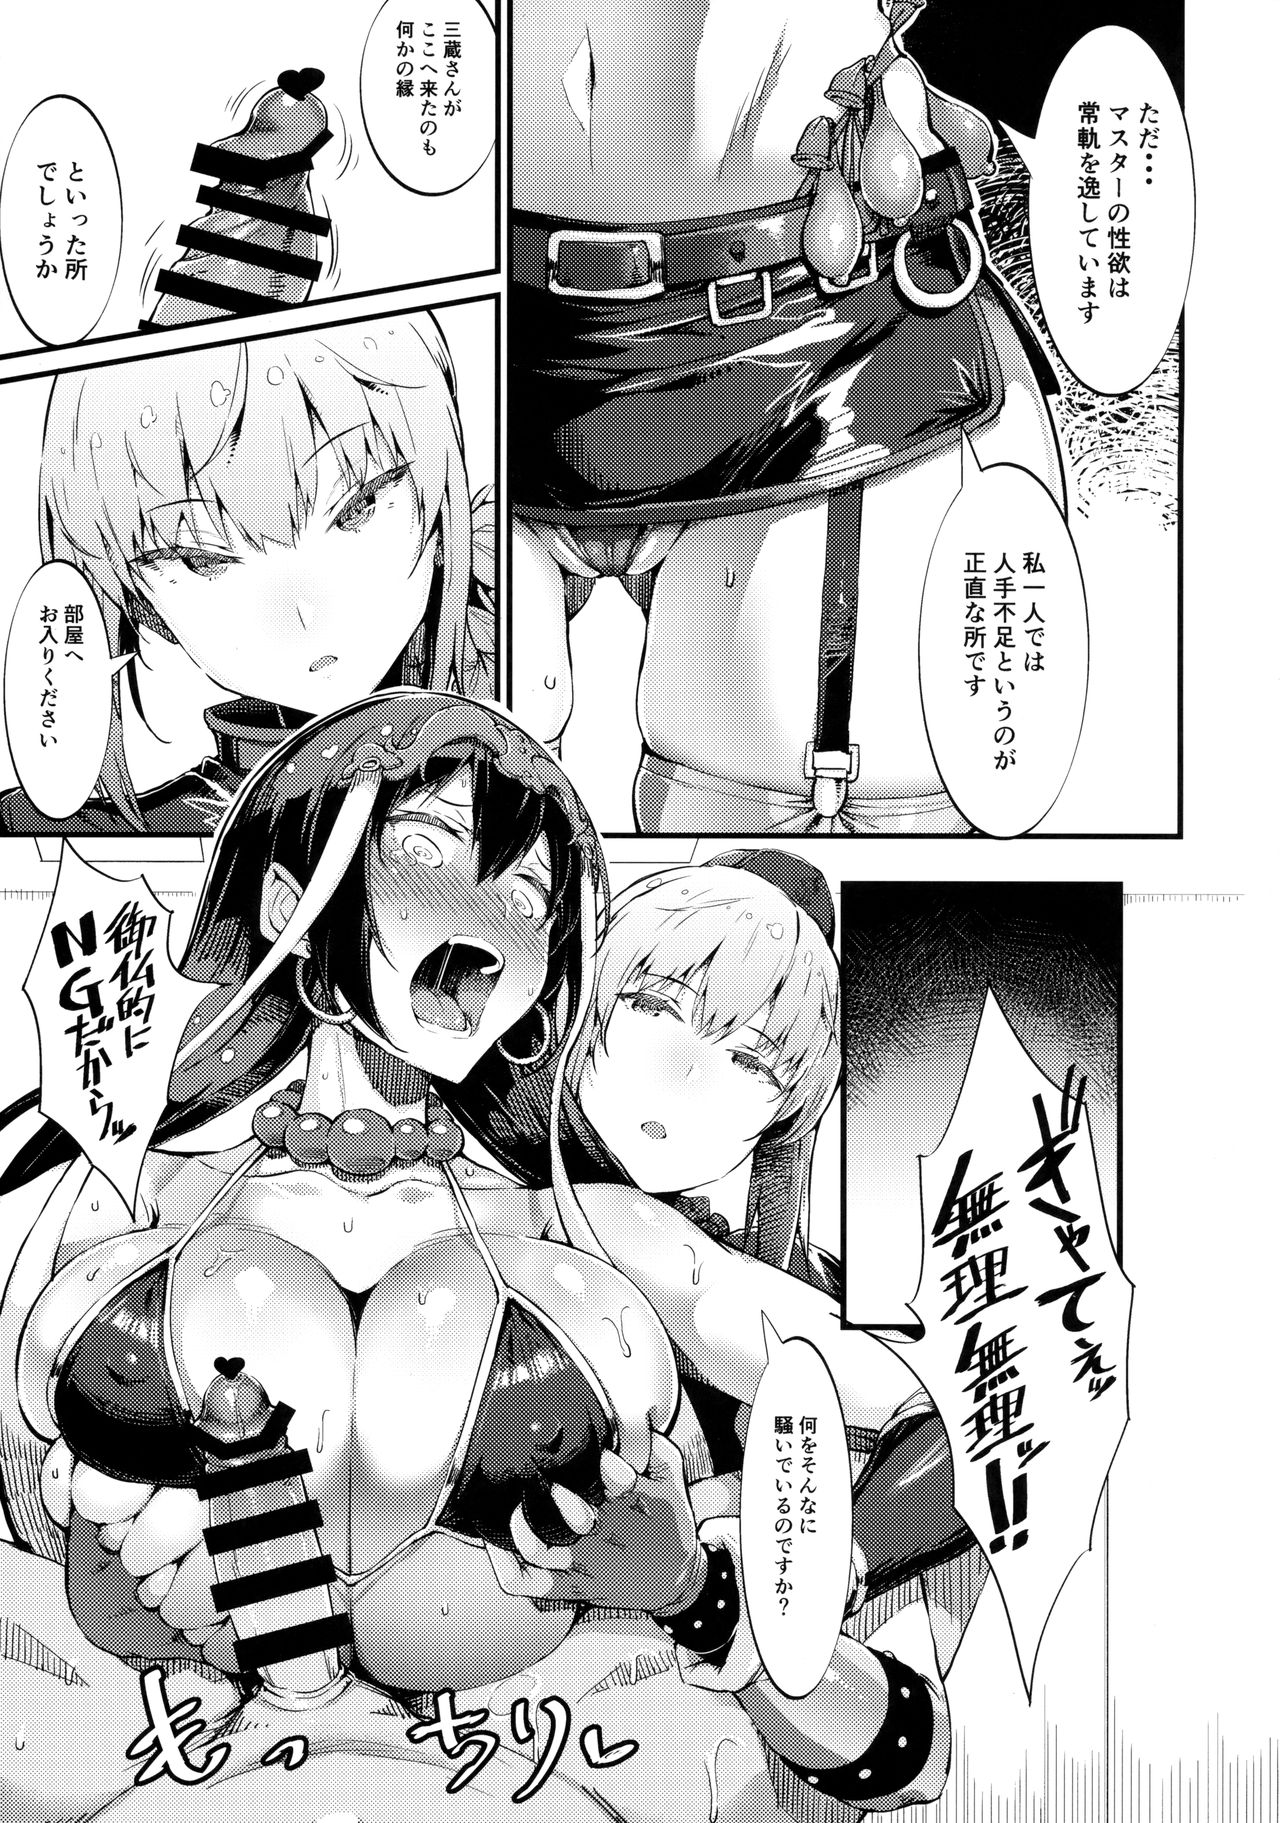 (C94) [Selvage Fisheries (Uo Denim)] S&N (Fate/Grand Order) page 12 full